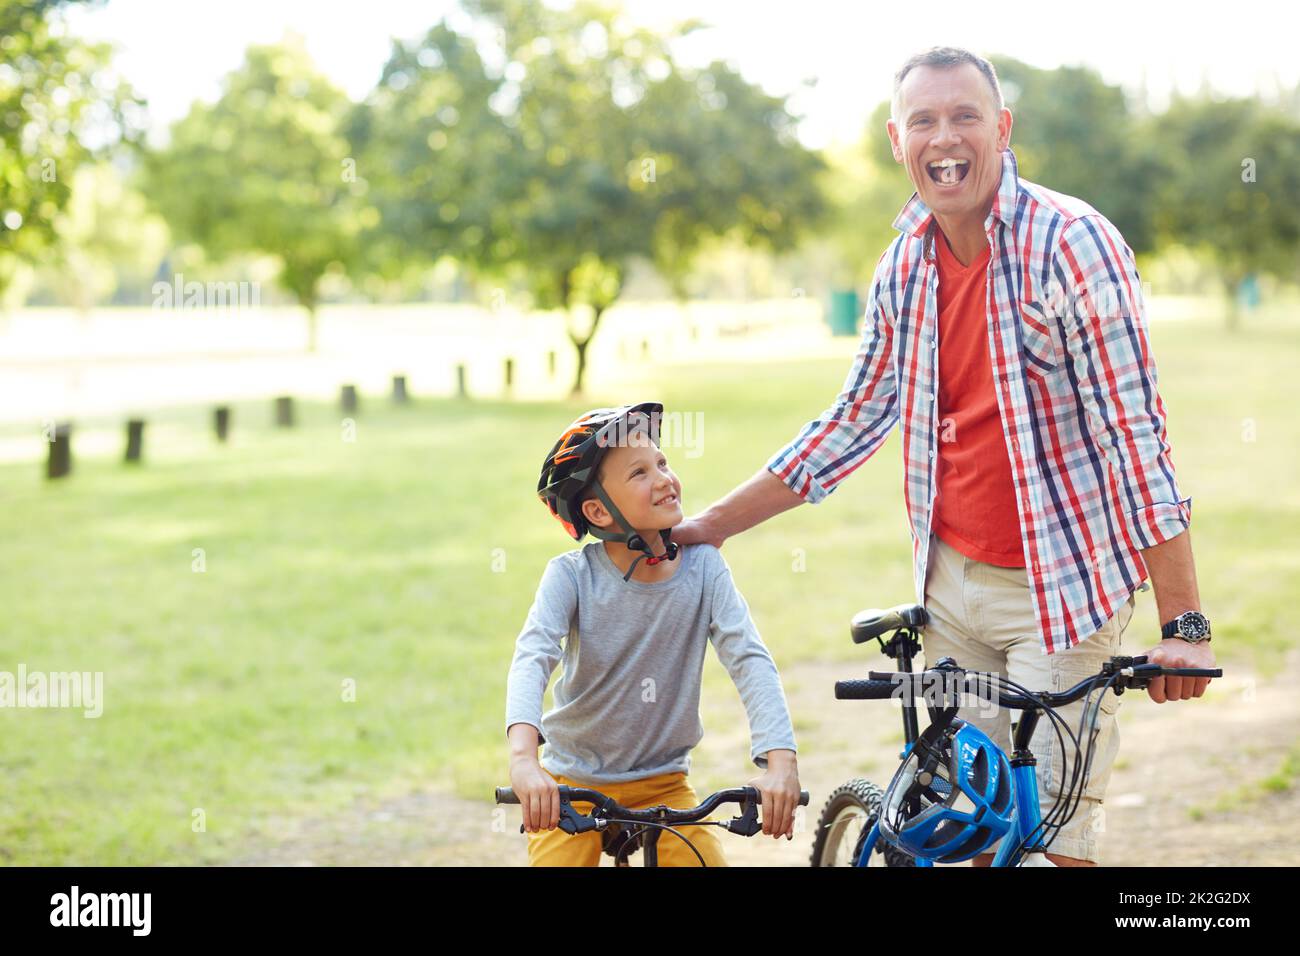 Hes a better rider than me now. Portrait of a father and son riding bicycles in a park. Stock Photo